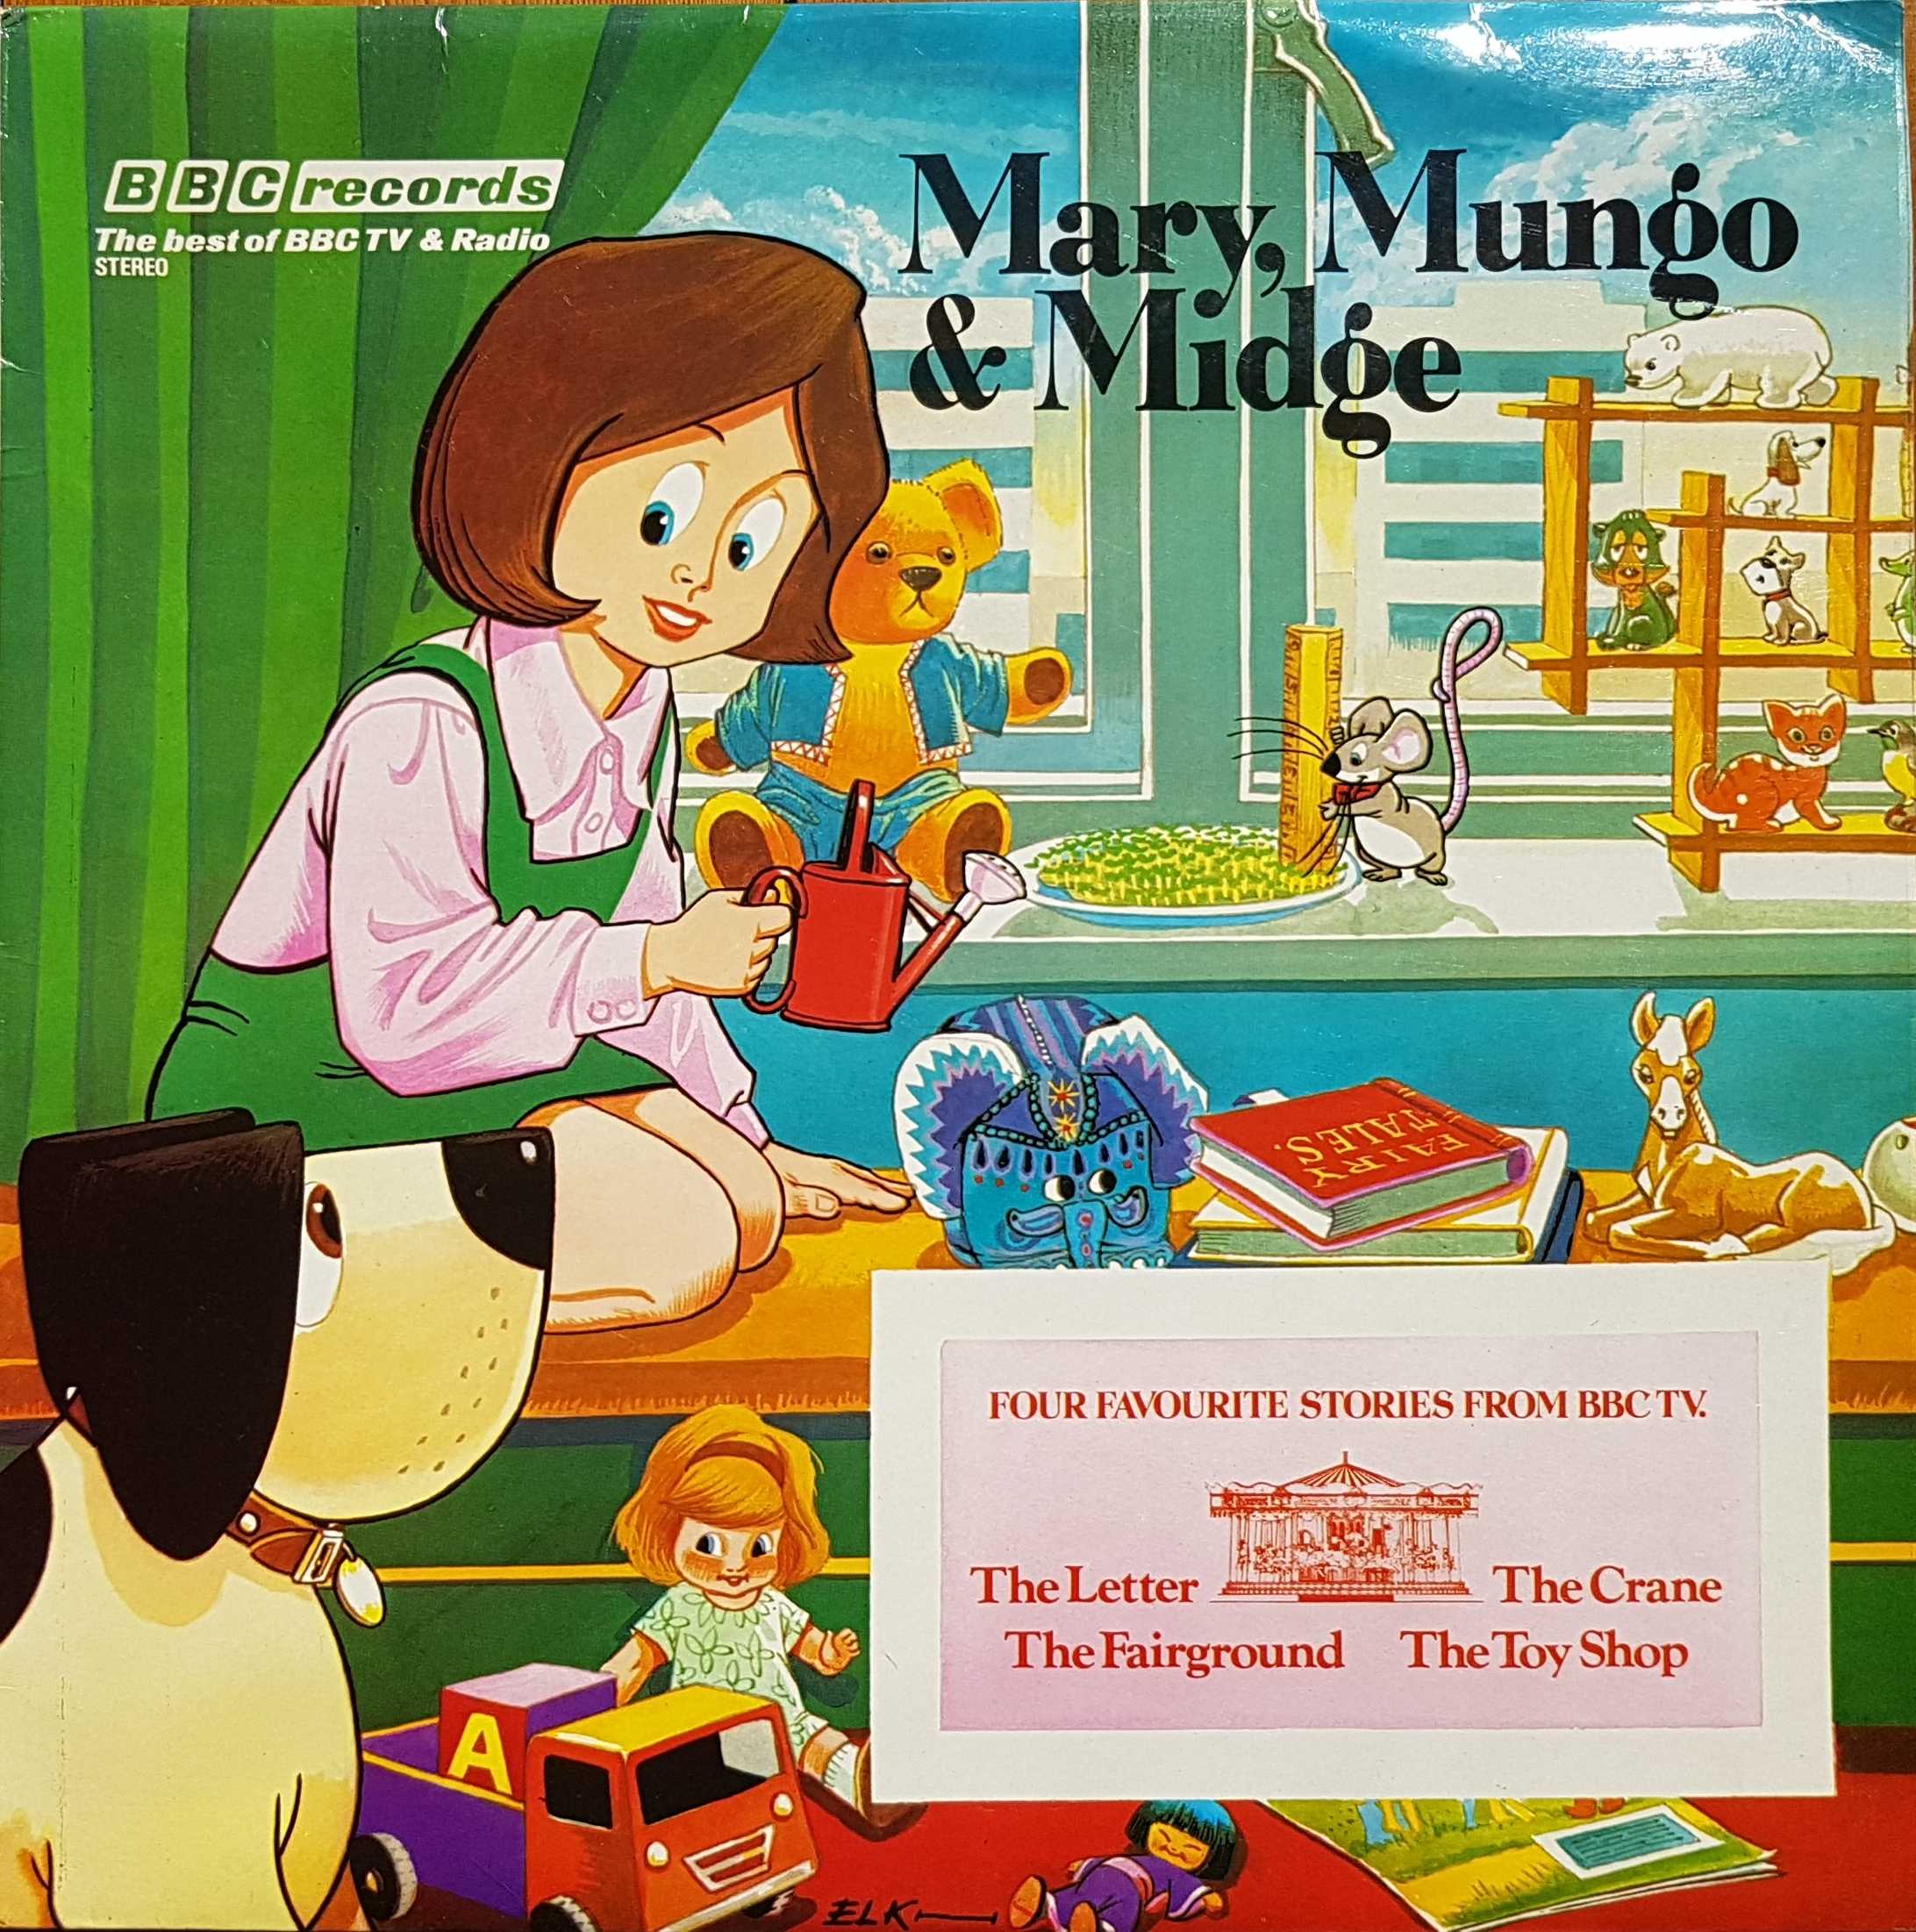 Picture of RBT 16 Mary, Mungo and Midge  by artist Daphne Jones / John Ryan from the BBC albums - Records and Tapes library